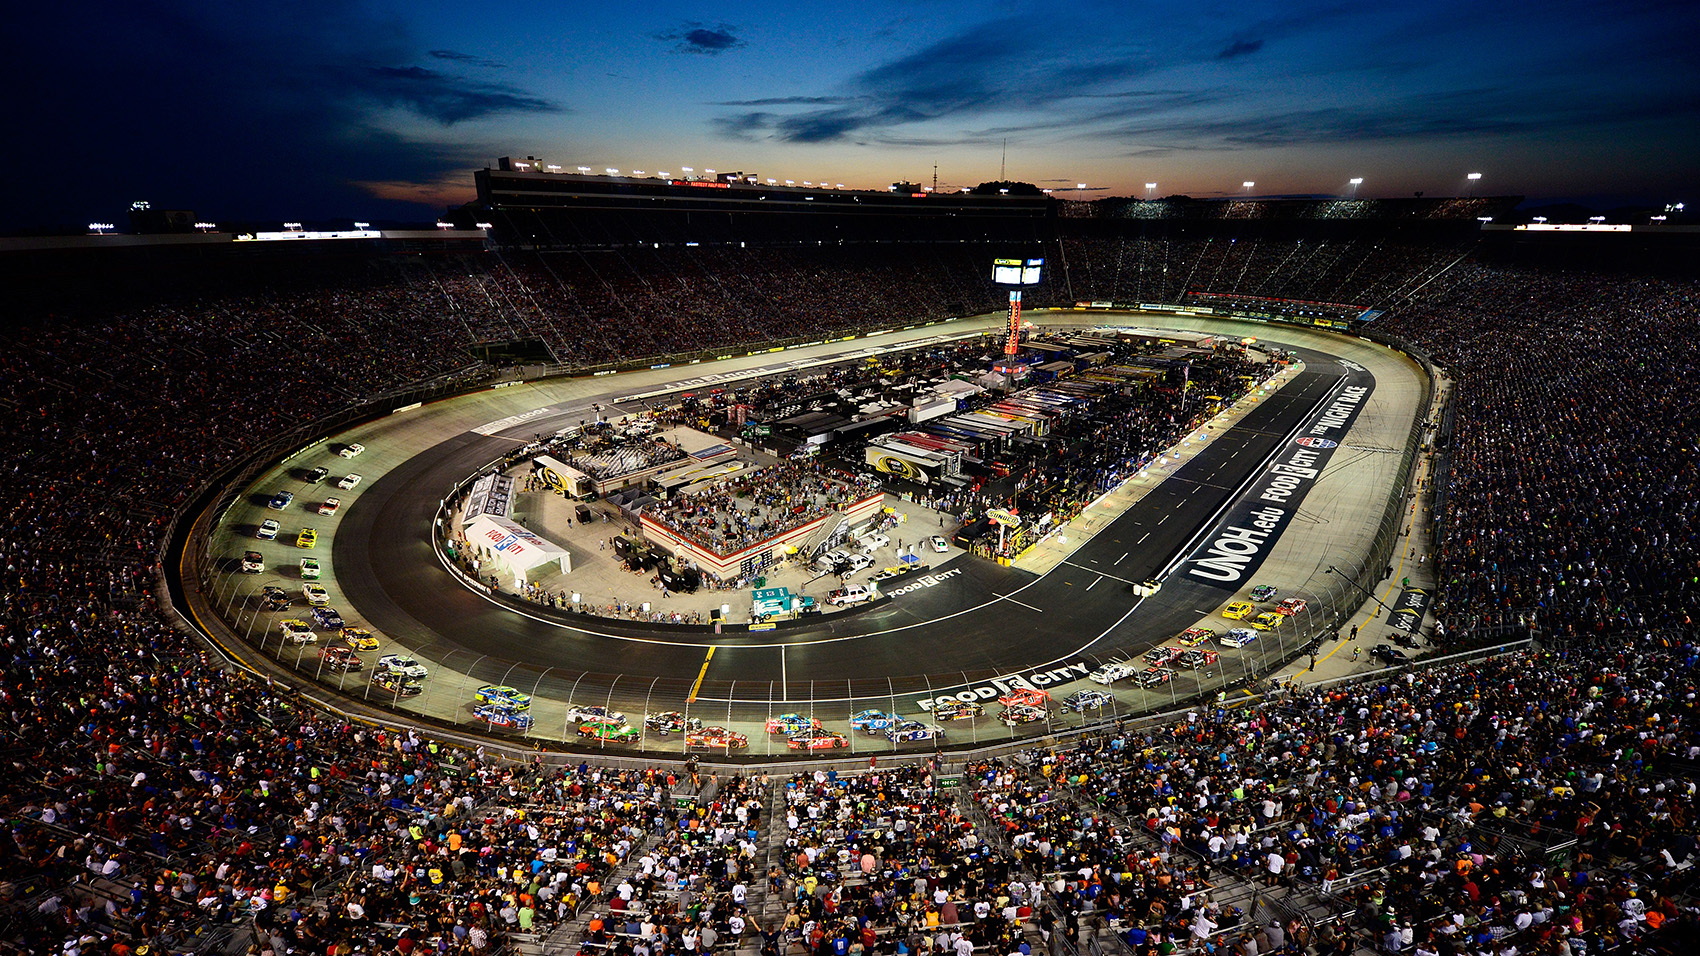 BRISTOL, TN - AUGUST 22: A general view of the speedway as cars race during the NASCAR Sprint Cup Series IRWIN Tools Night Race at Bristol Motor Speedway on August 22, 2015 in Bristol, Tennessee.  (Photo by Jeff Curry/NASCAR via Getty Images)